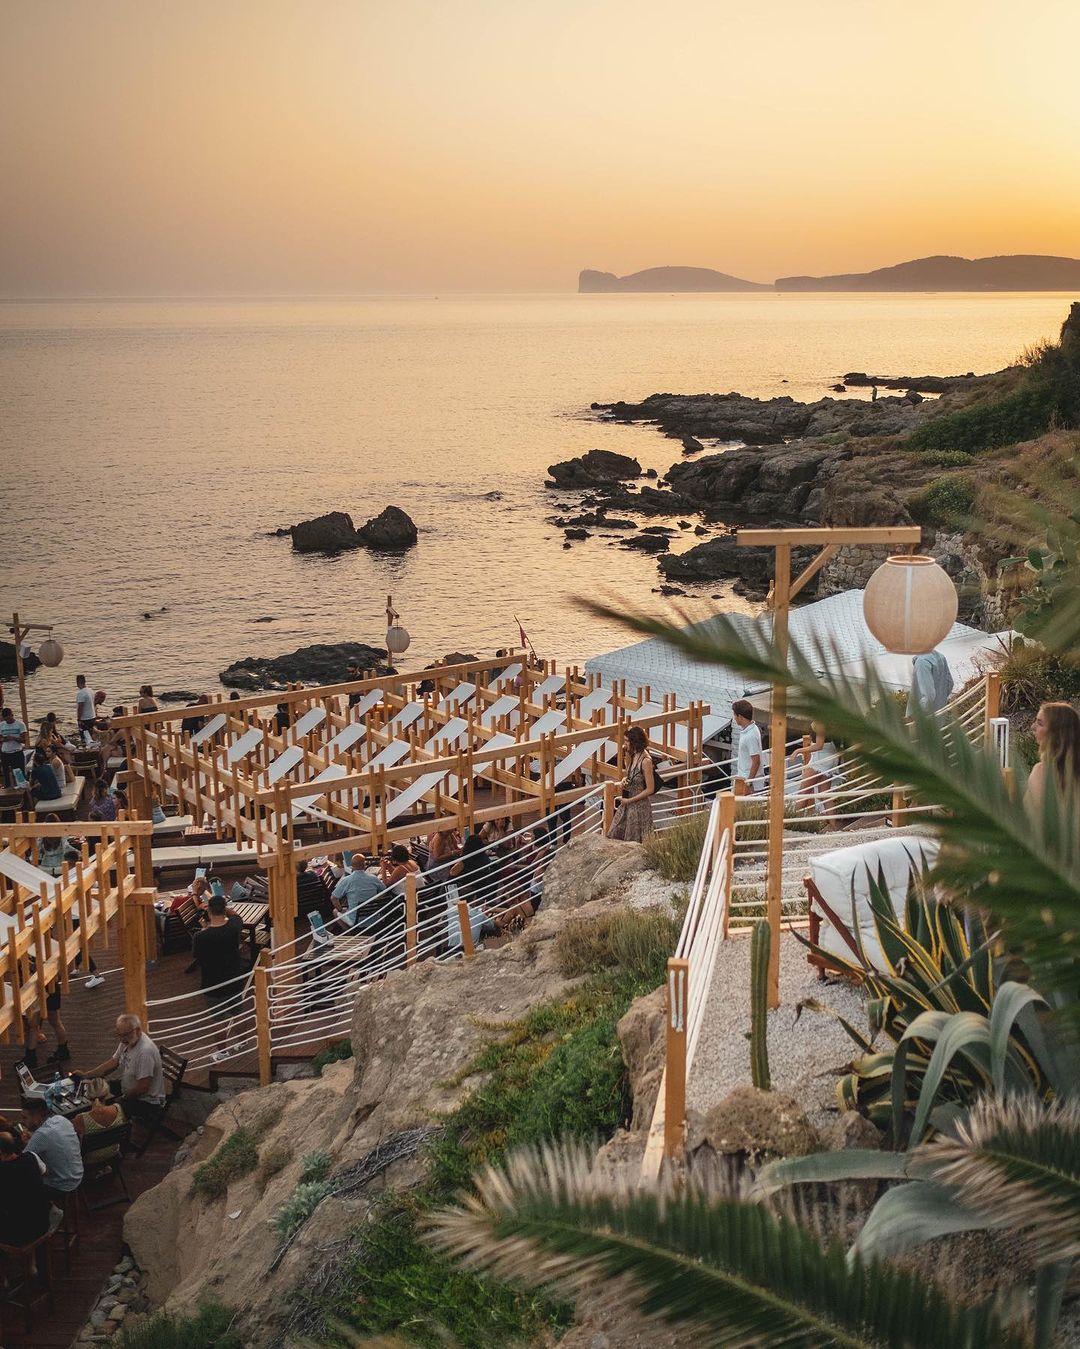 Riservato Beach Bar is the ideal place to enjoy a breathtaking sunset overlooking the sea